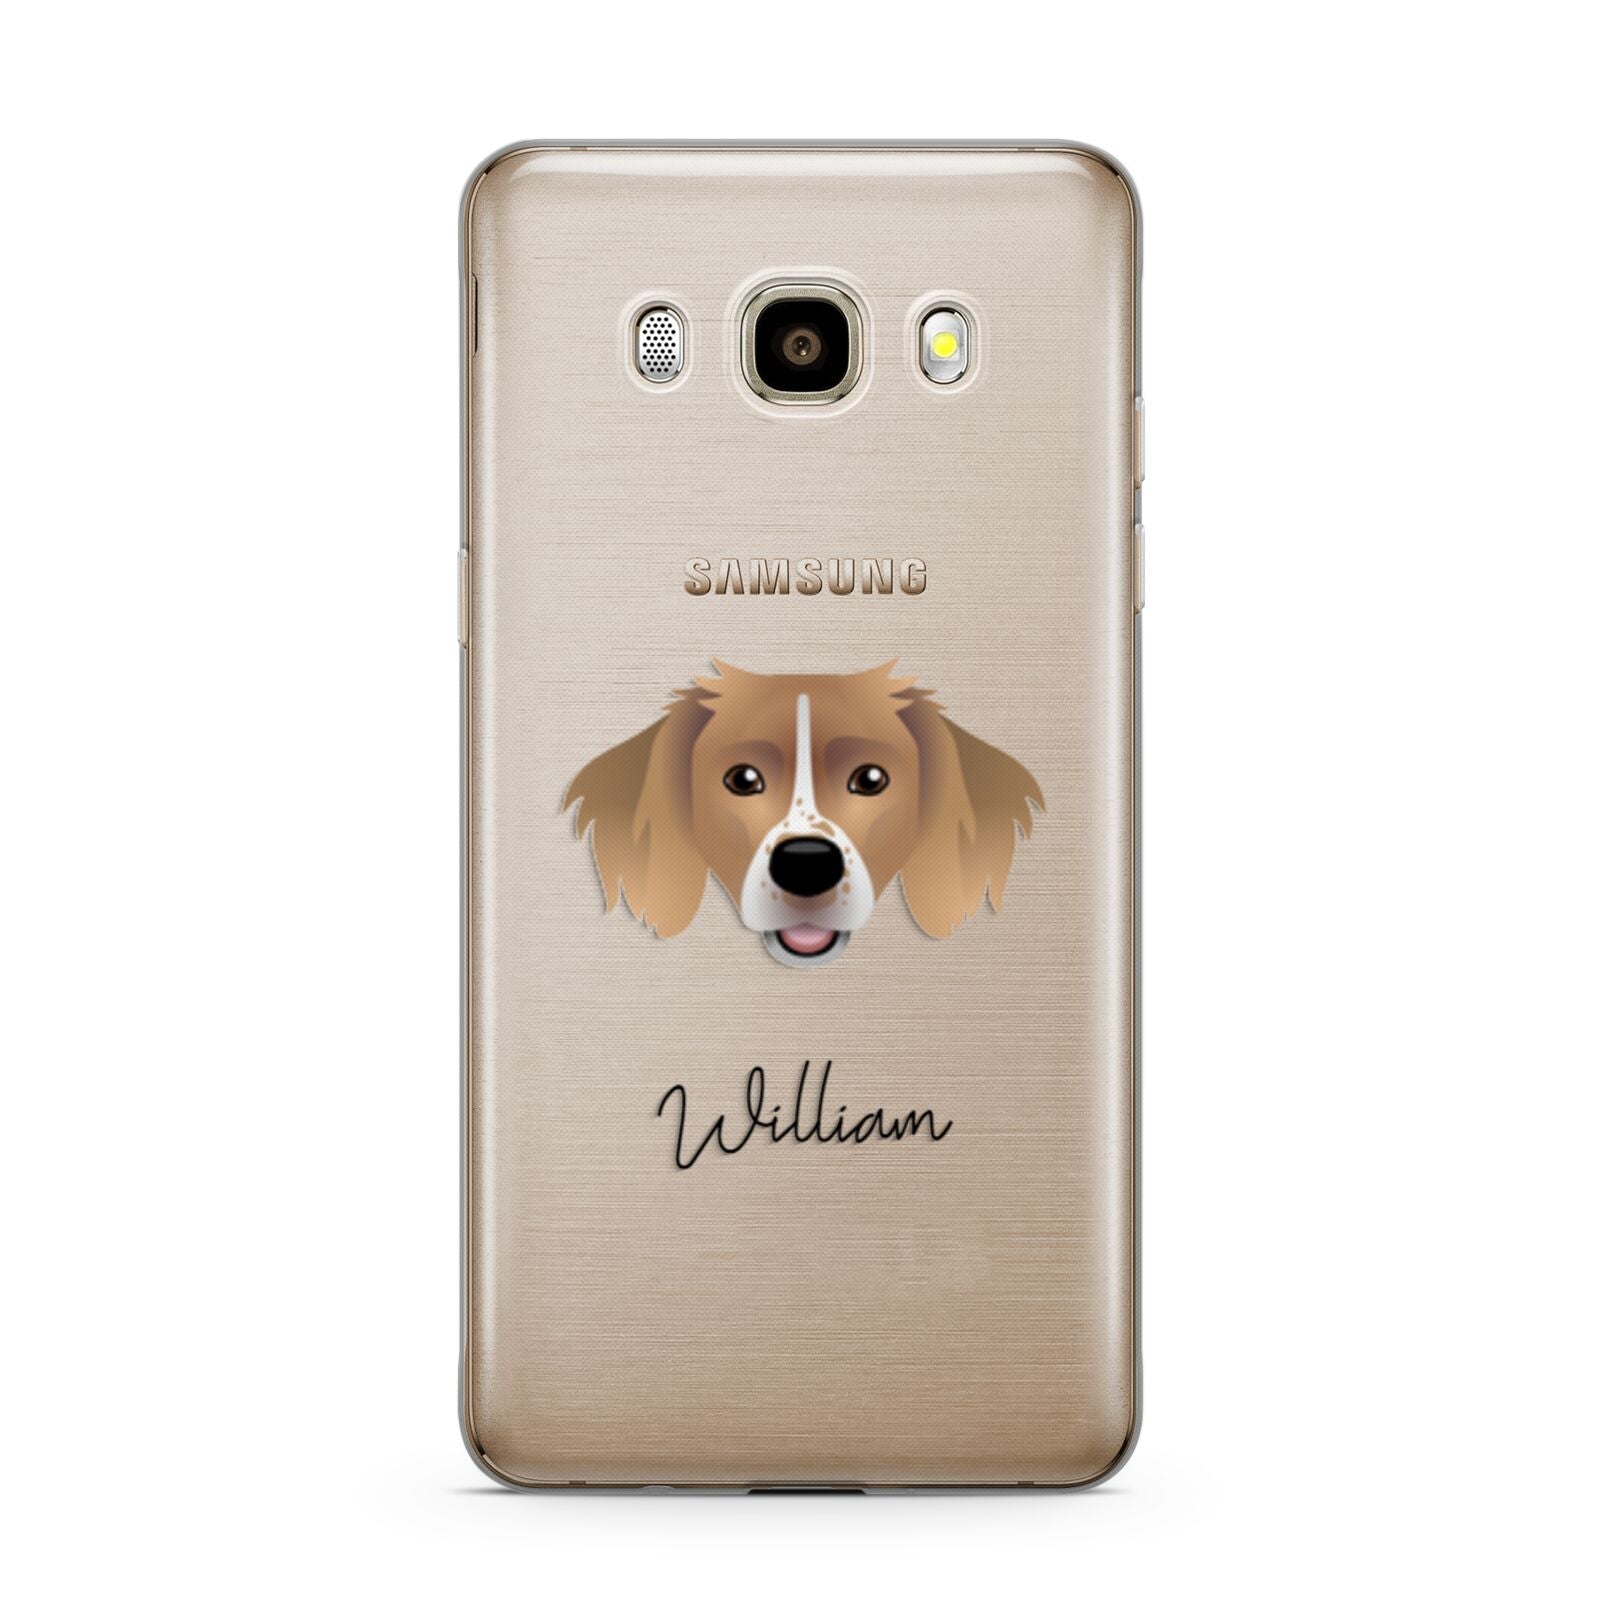 Sprollie Personalised Samsung Galaxy J7 2016 Case on gold phone